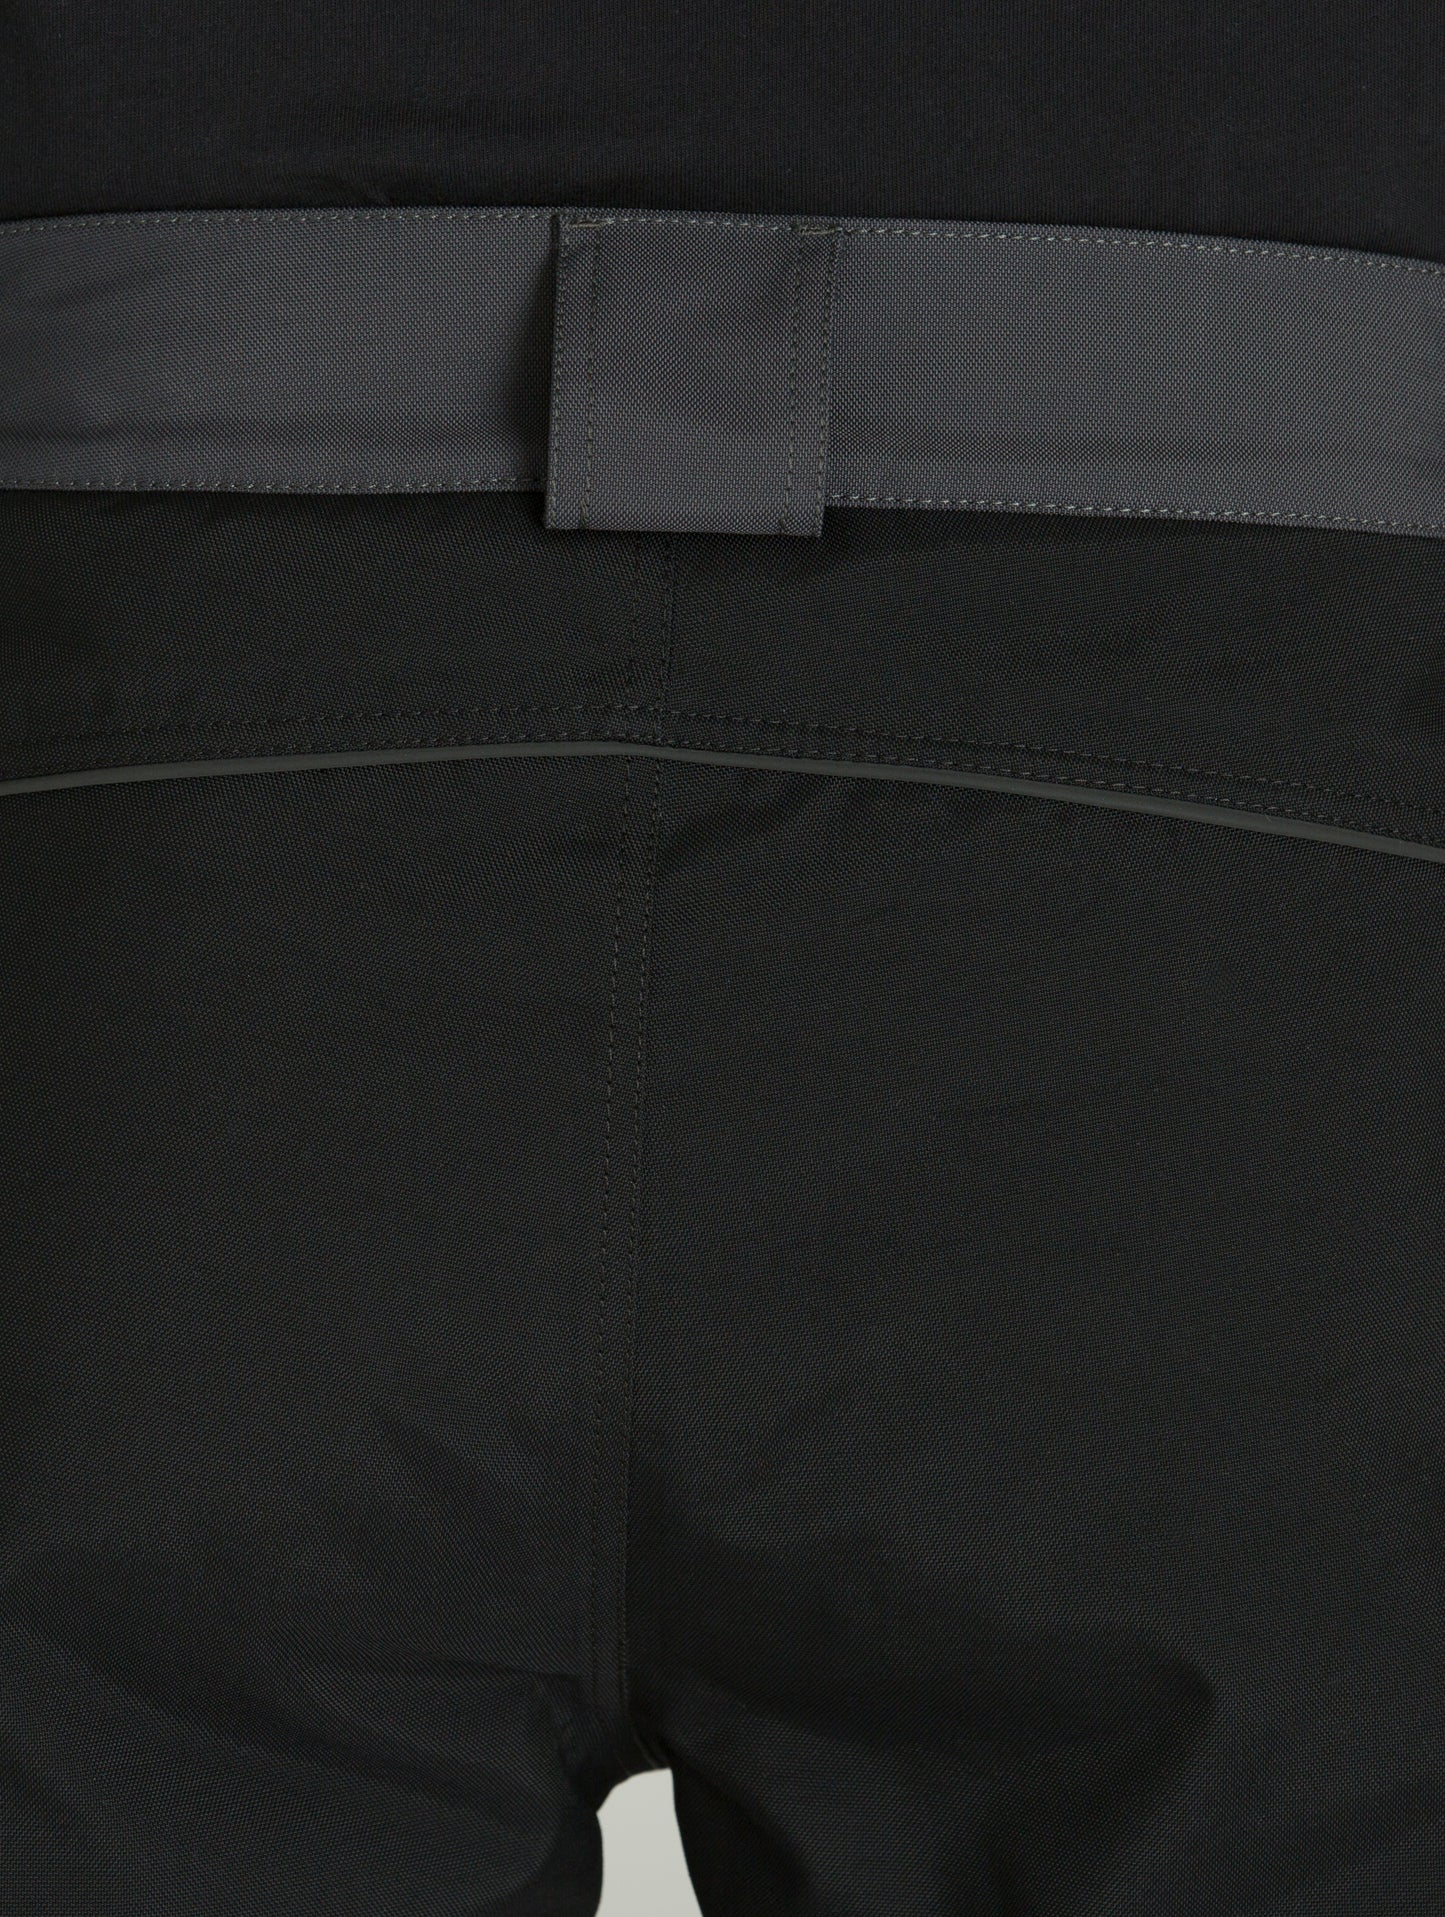 Expedition Motorcycle Pant - Graphite